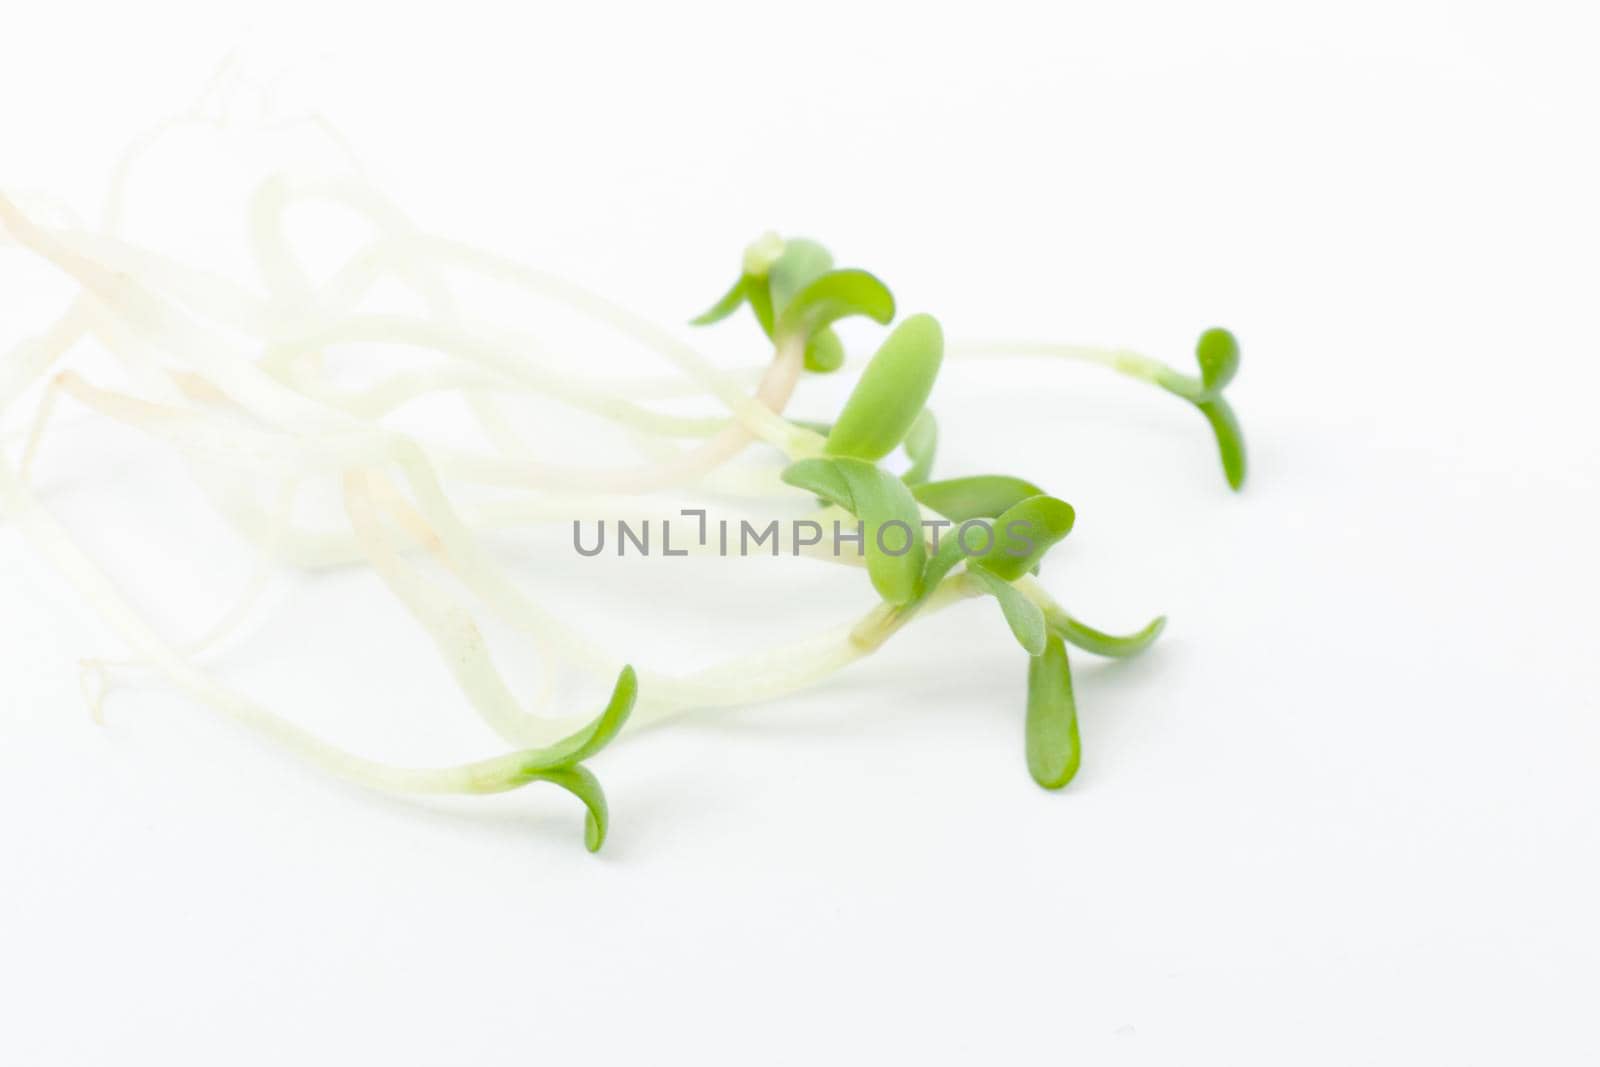 Heap of alfalfa sprouts on white background. Micro leaf vegetable of green alfalfa seeds sprouts.